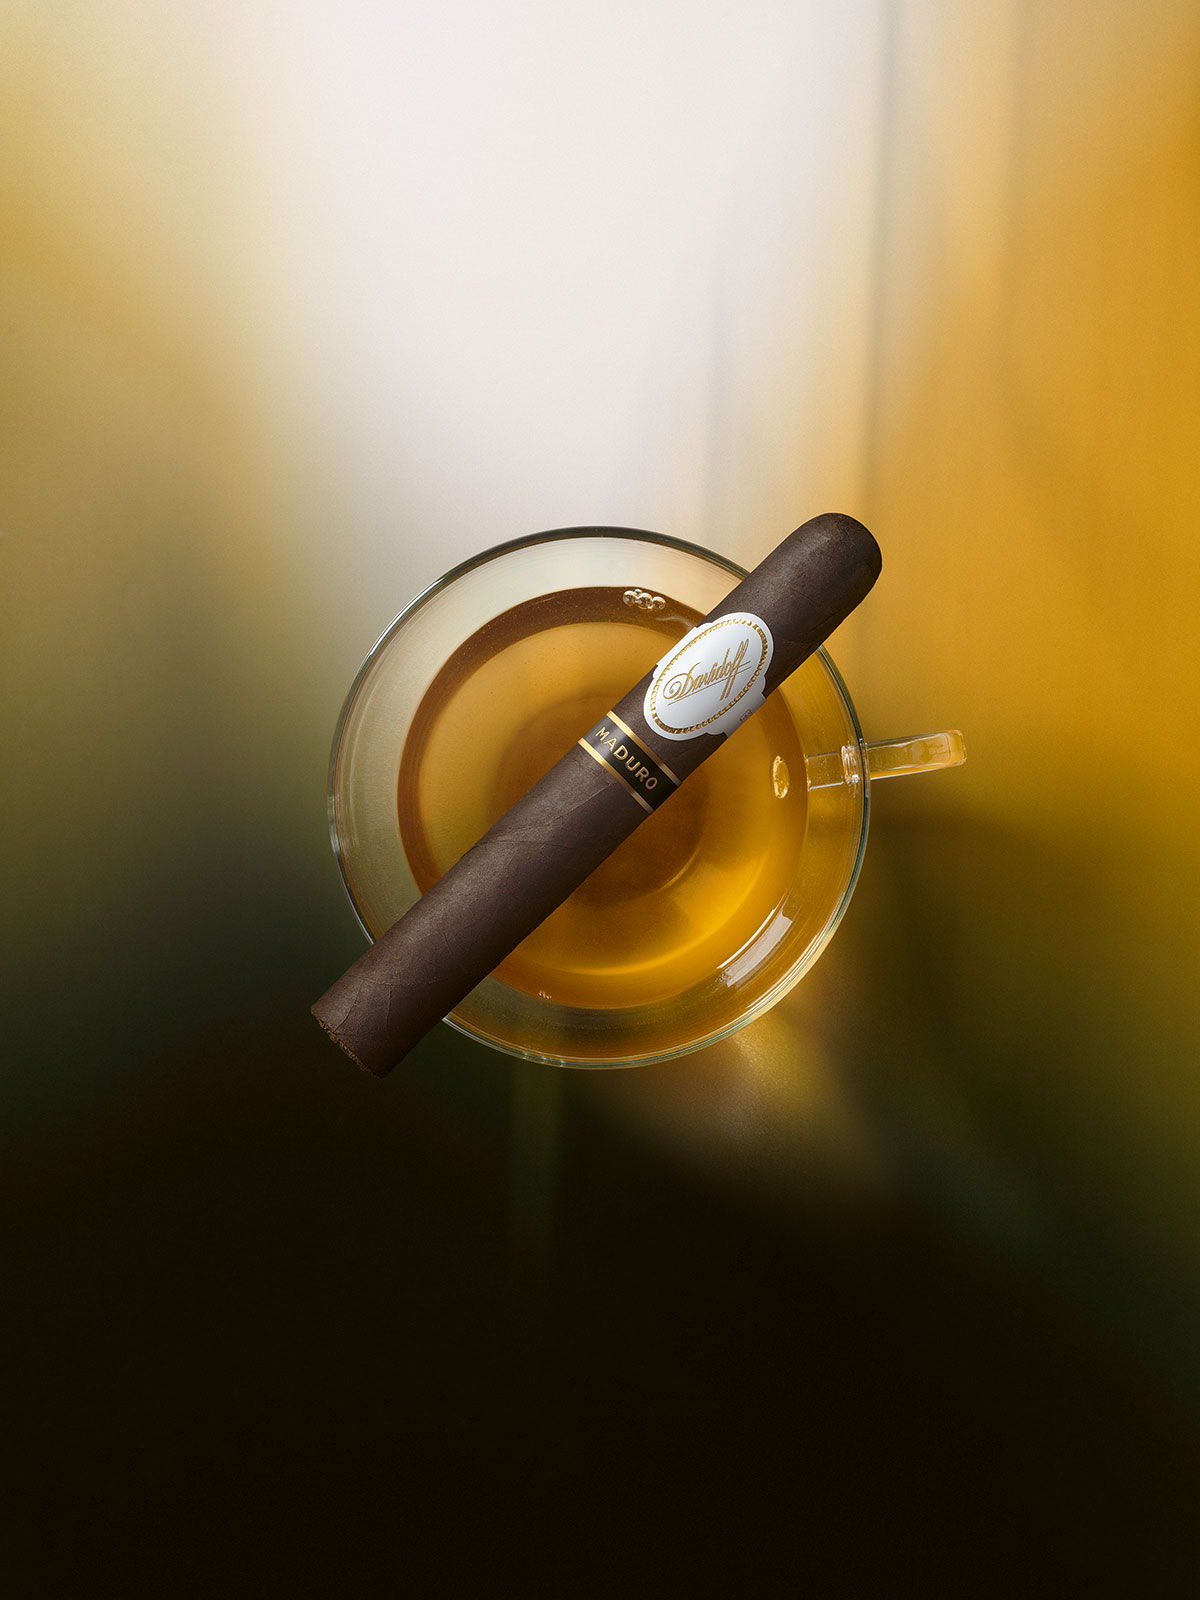 The Davidoff Maduro cigar placed on top of a glass filled with Lapsang Souchong tea.